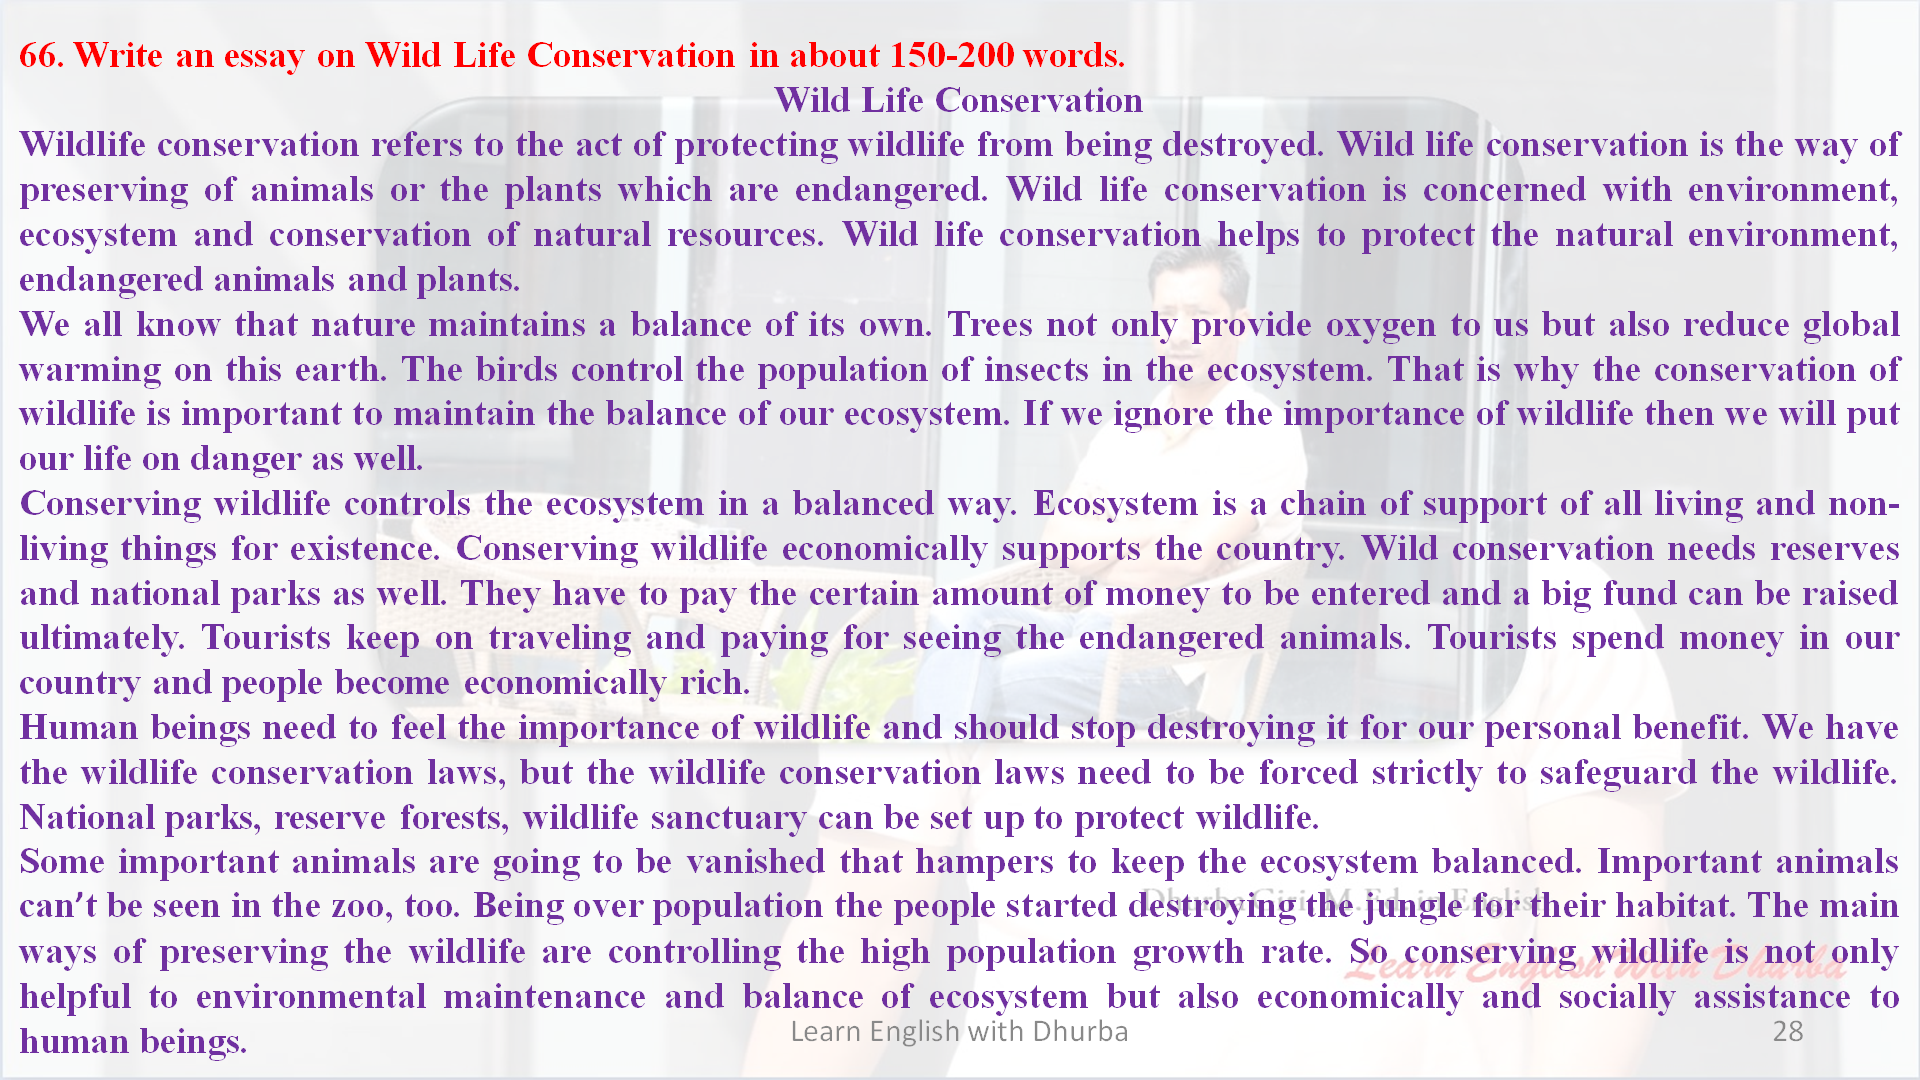 66. Write an essay on Wild Life Conservation in about 150-200 words.